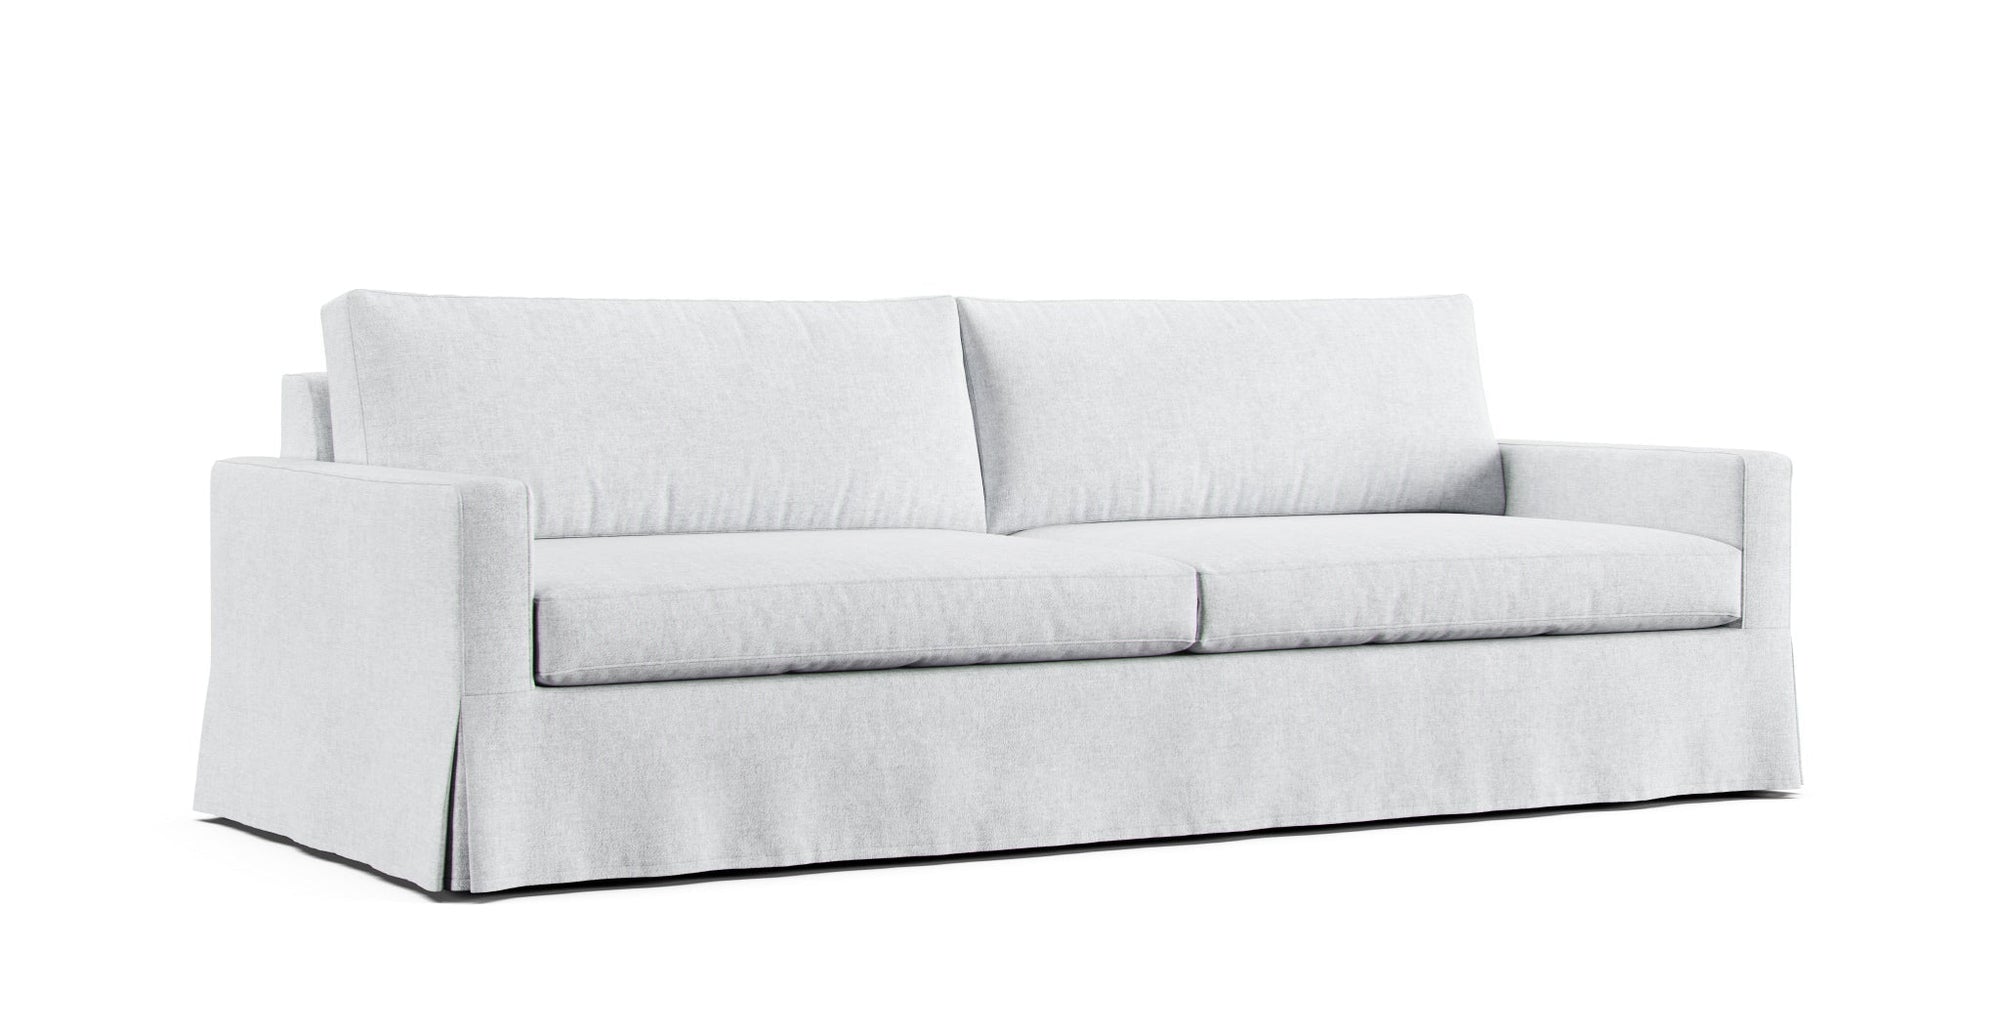 Room and Board Hess eighty-nine inches sofa featuring machine washable white Cotton Canvas slipcover